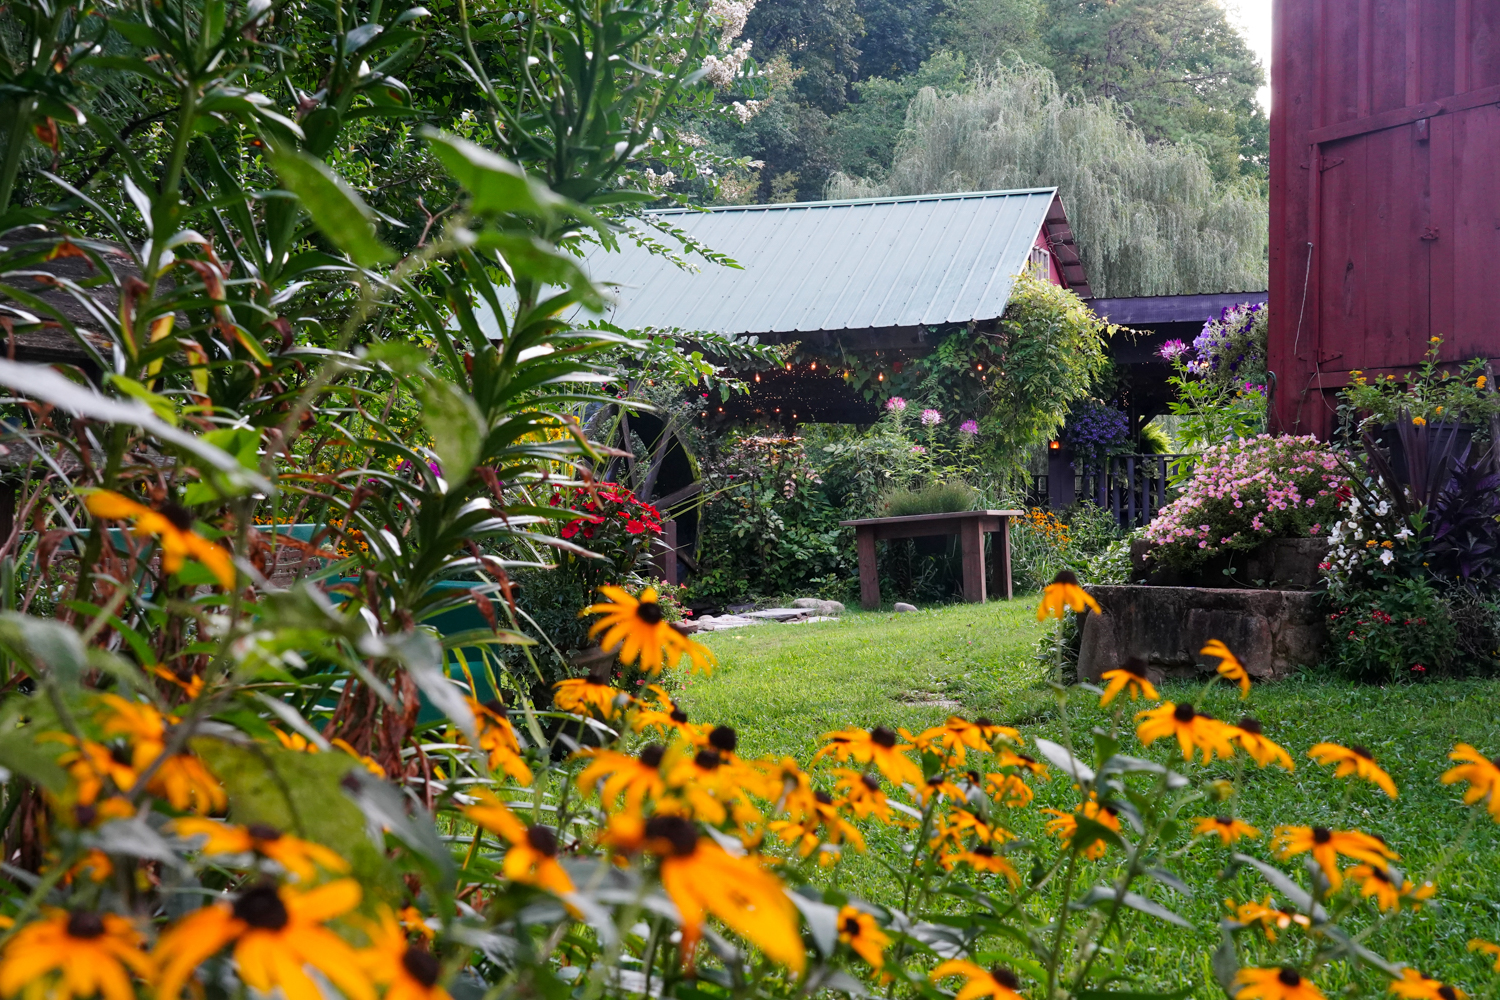 Black eyed susans blooming in front of a covered pavilion by a red barn wedding venue